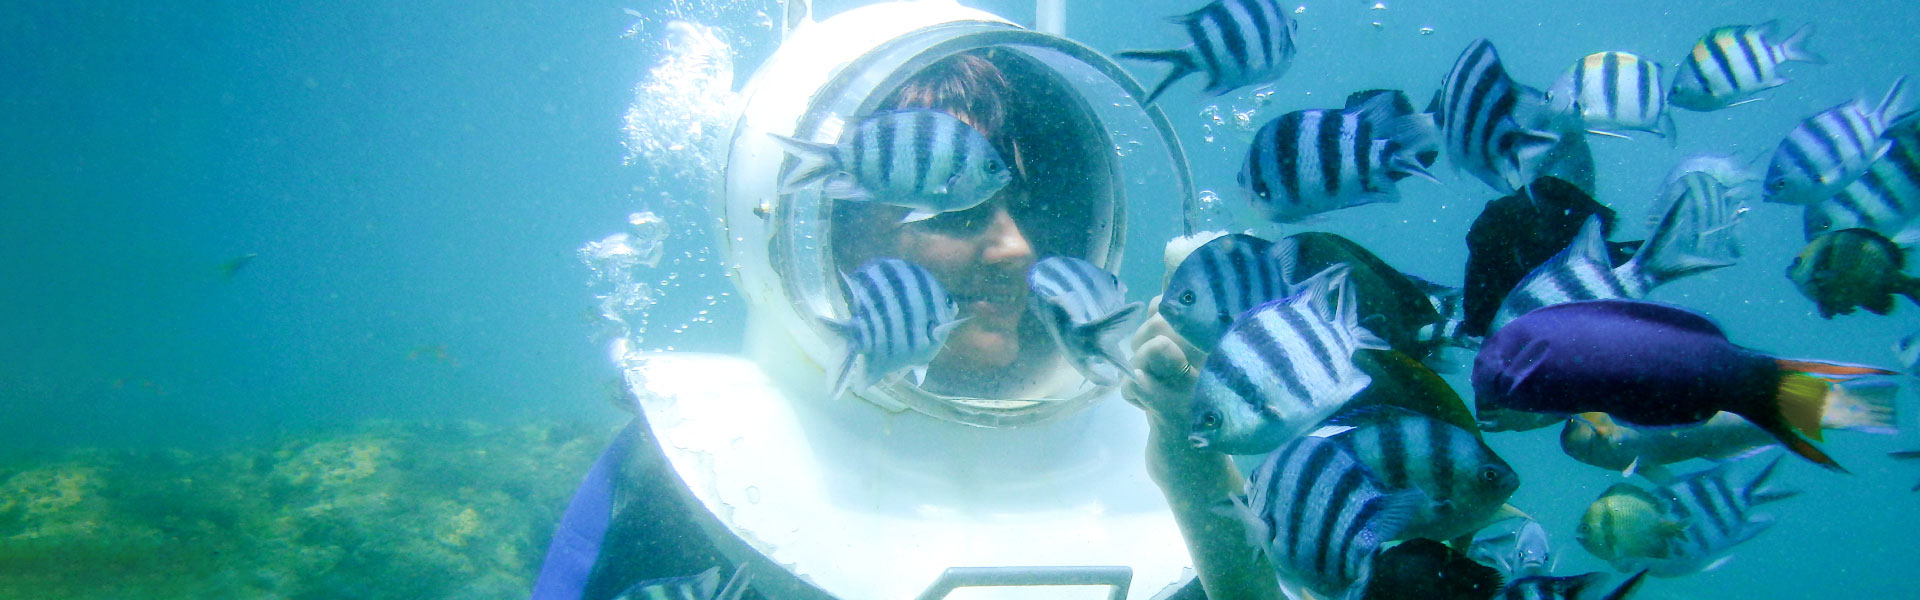 Research diver interacting with fish under water